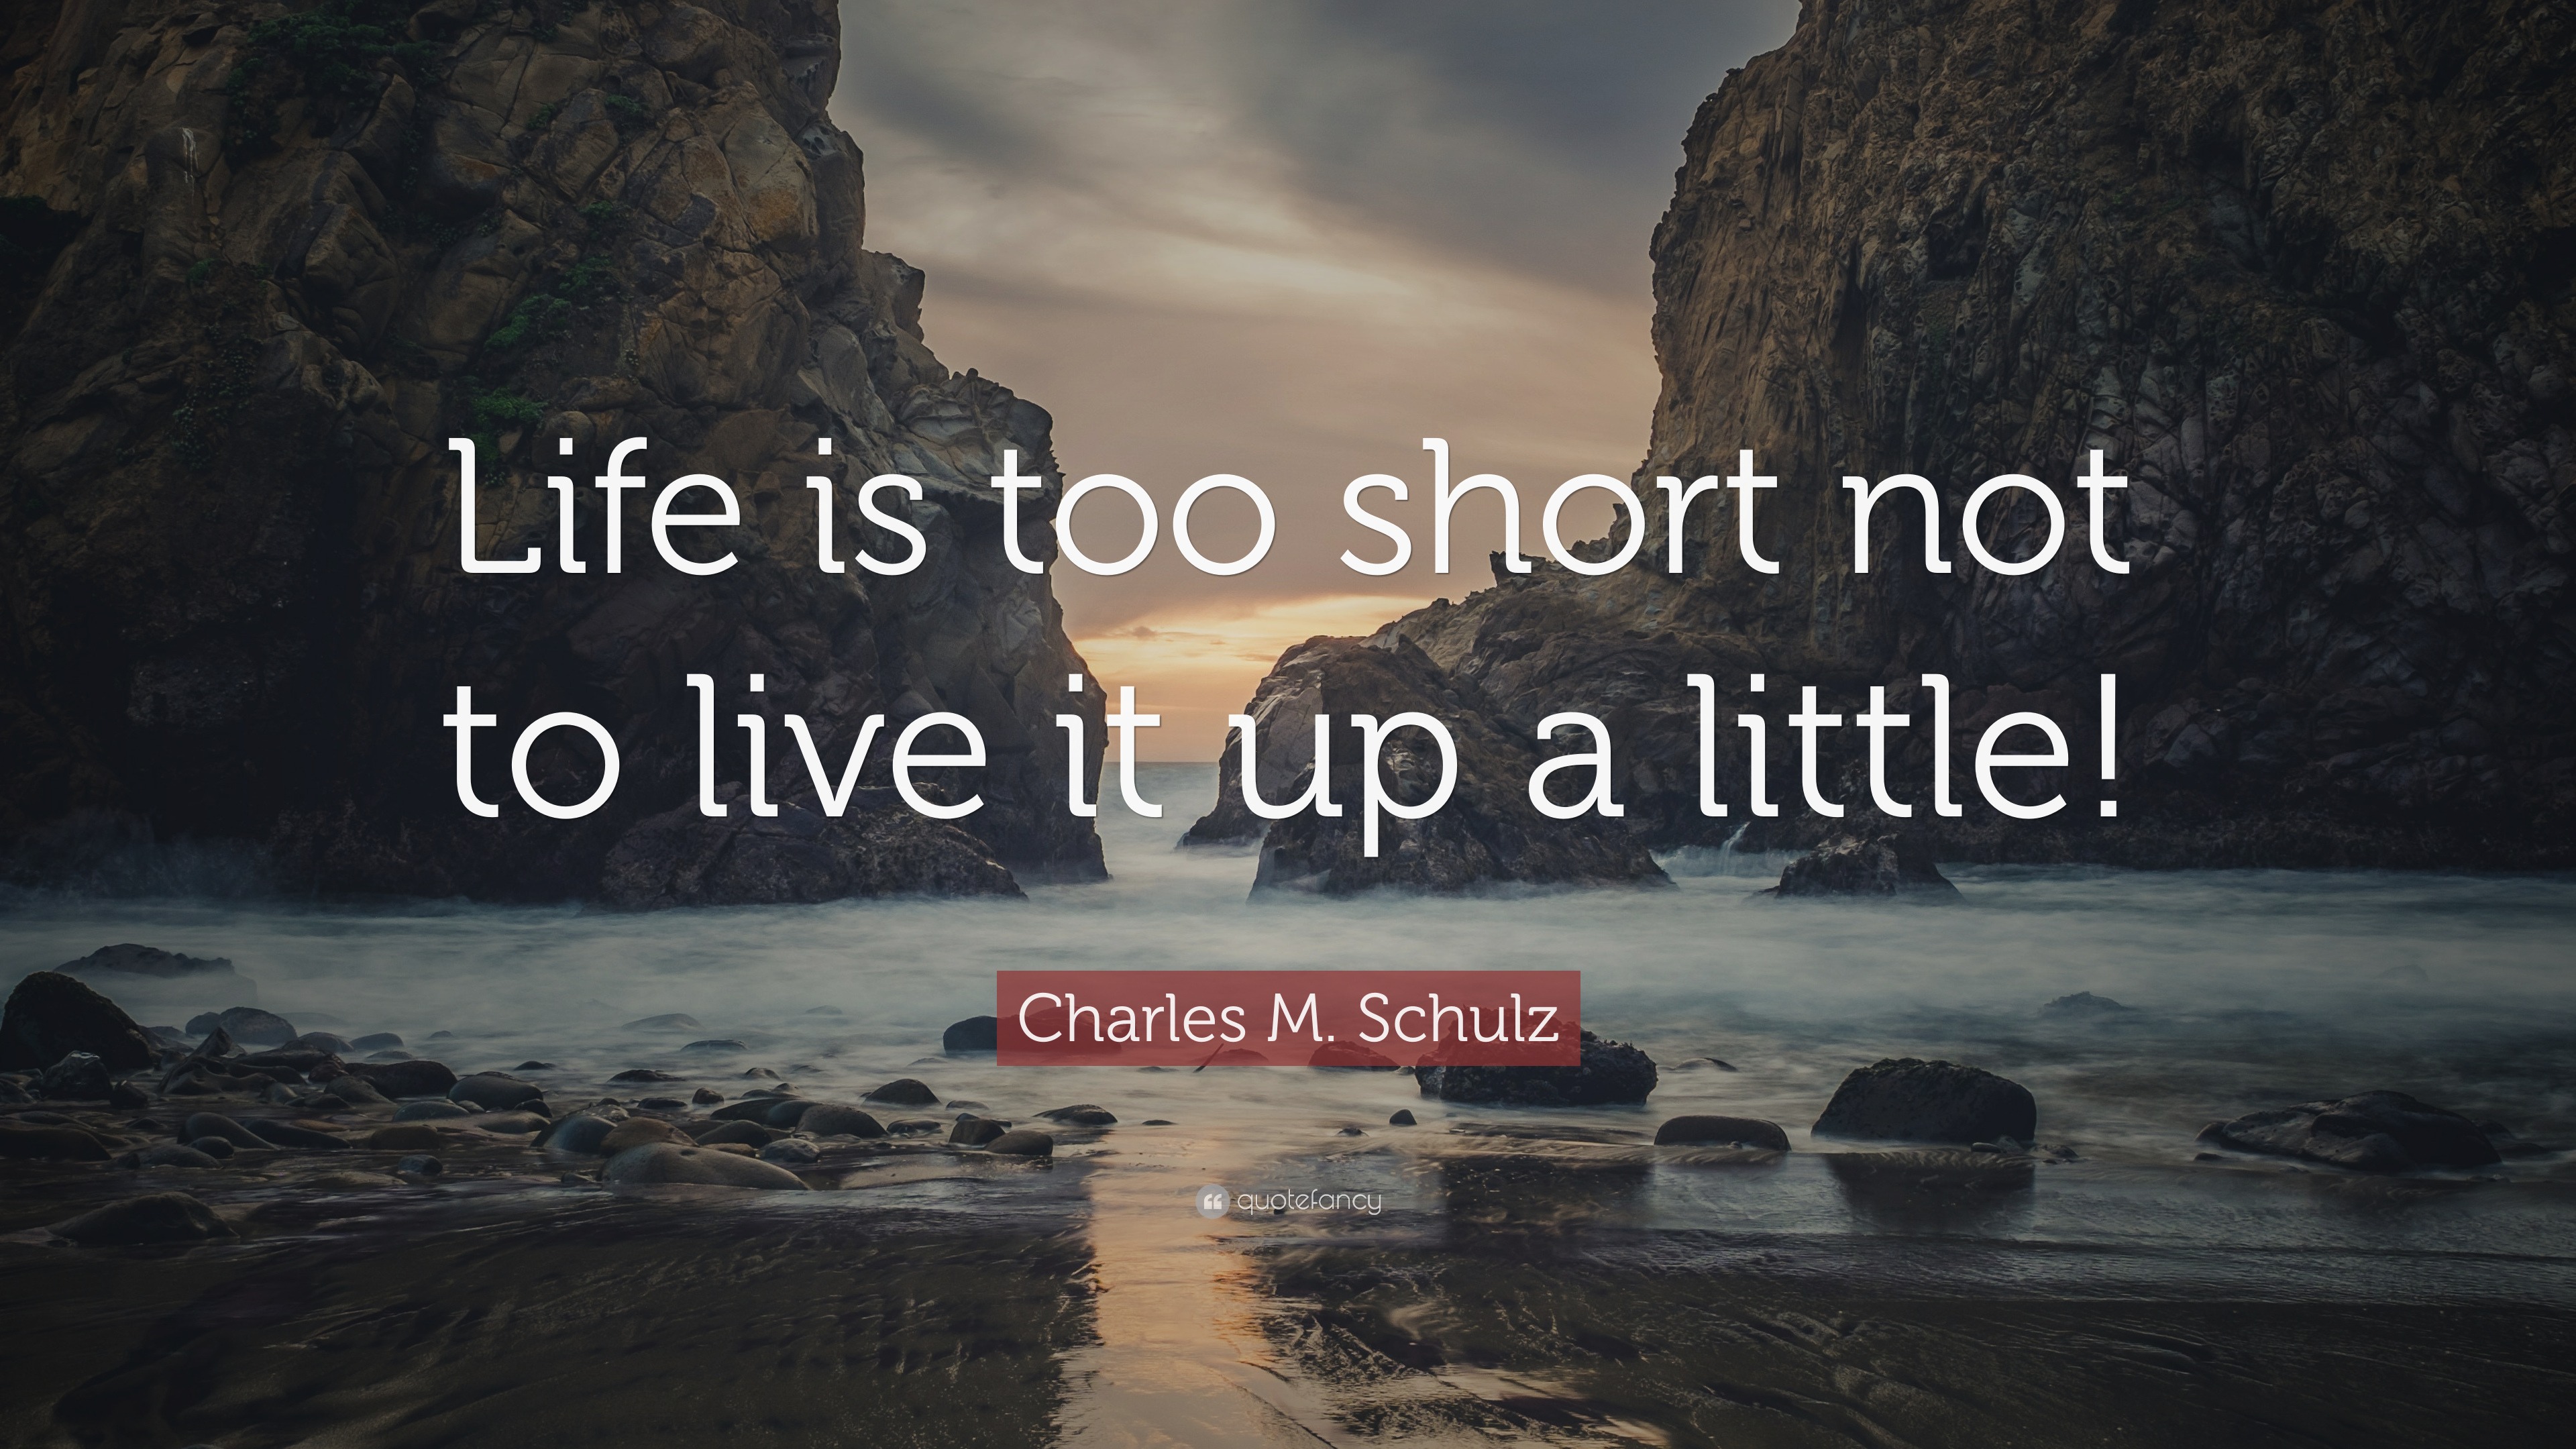 https://quotefancy.com/media/wallpaper/3840x2160/5023625-Charles-M-Schulz-Quote-Life-is-too-short-not-to-live-it-up-a.jpg